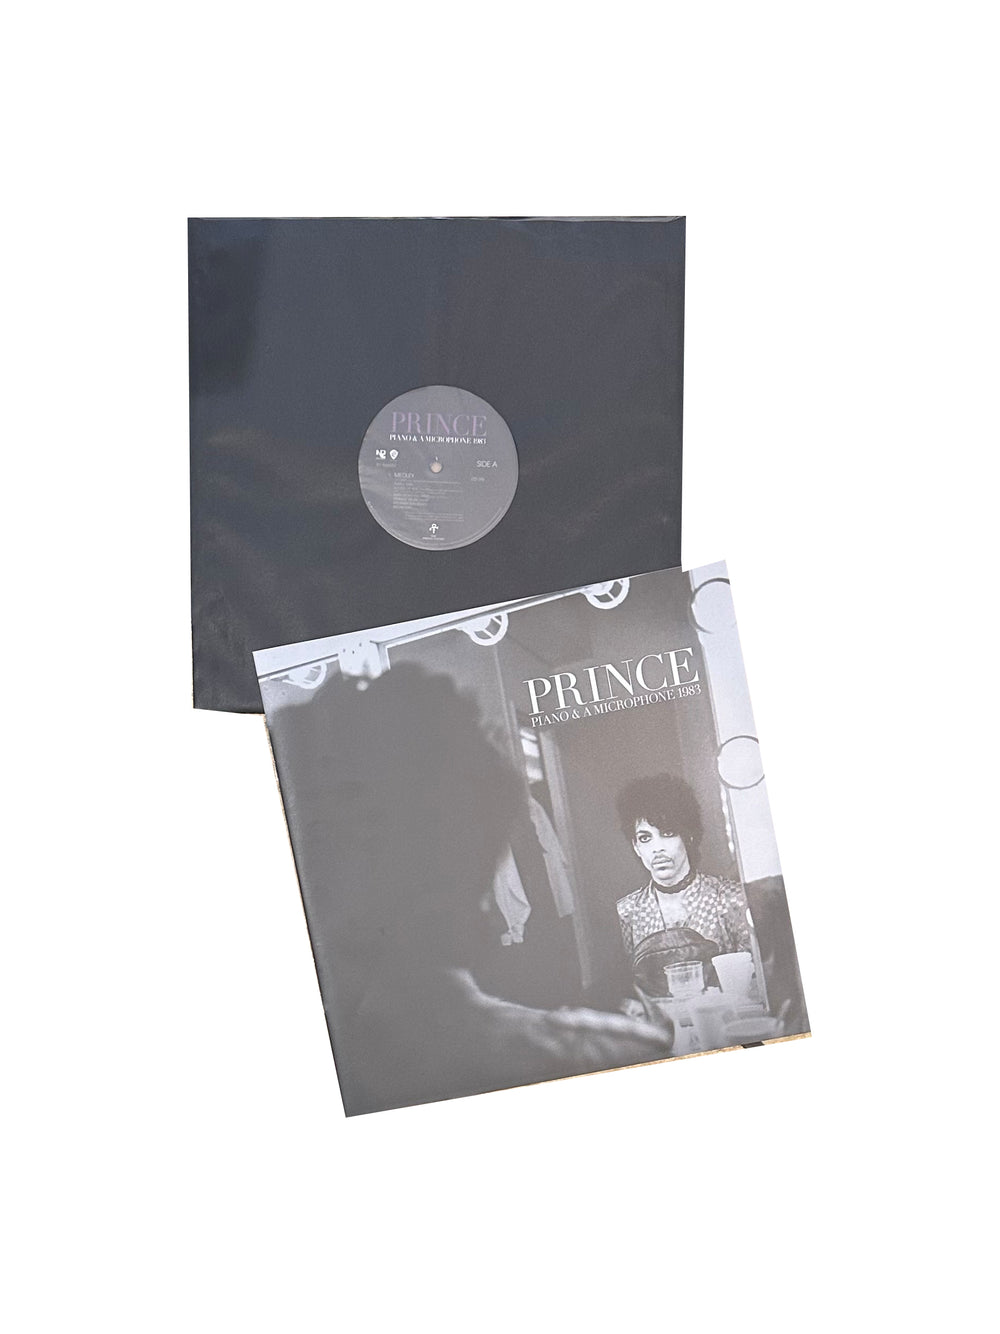 Prince – Piano & A Microphone 1983 Vinyl LP 180g CD Album Box Set Deluxe Edition Preloved AS NEW: 2018